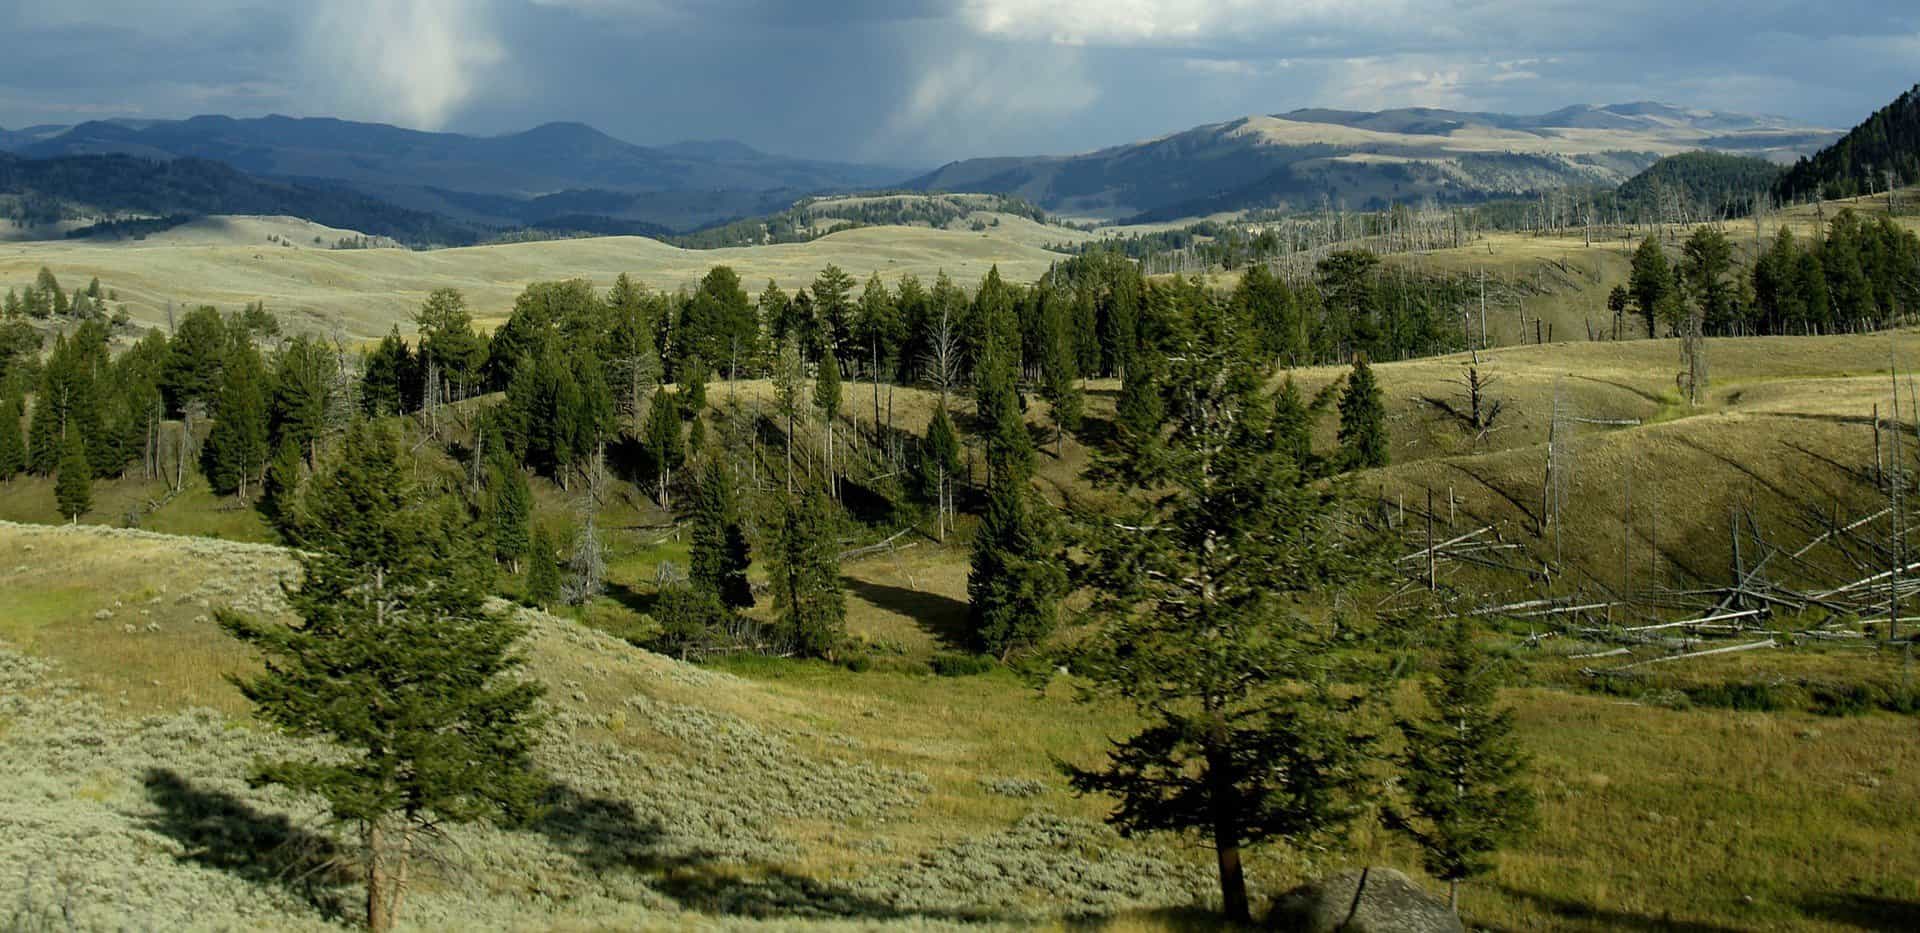 A view of a meadow in Yellowstone National Park with trees and grass and mountains behind.